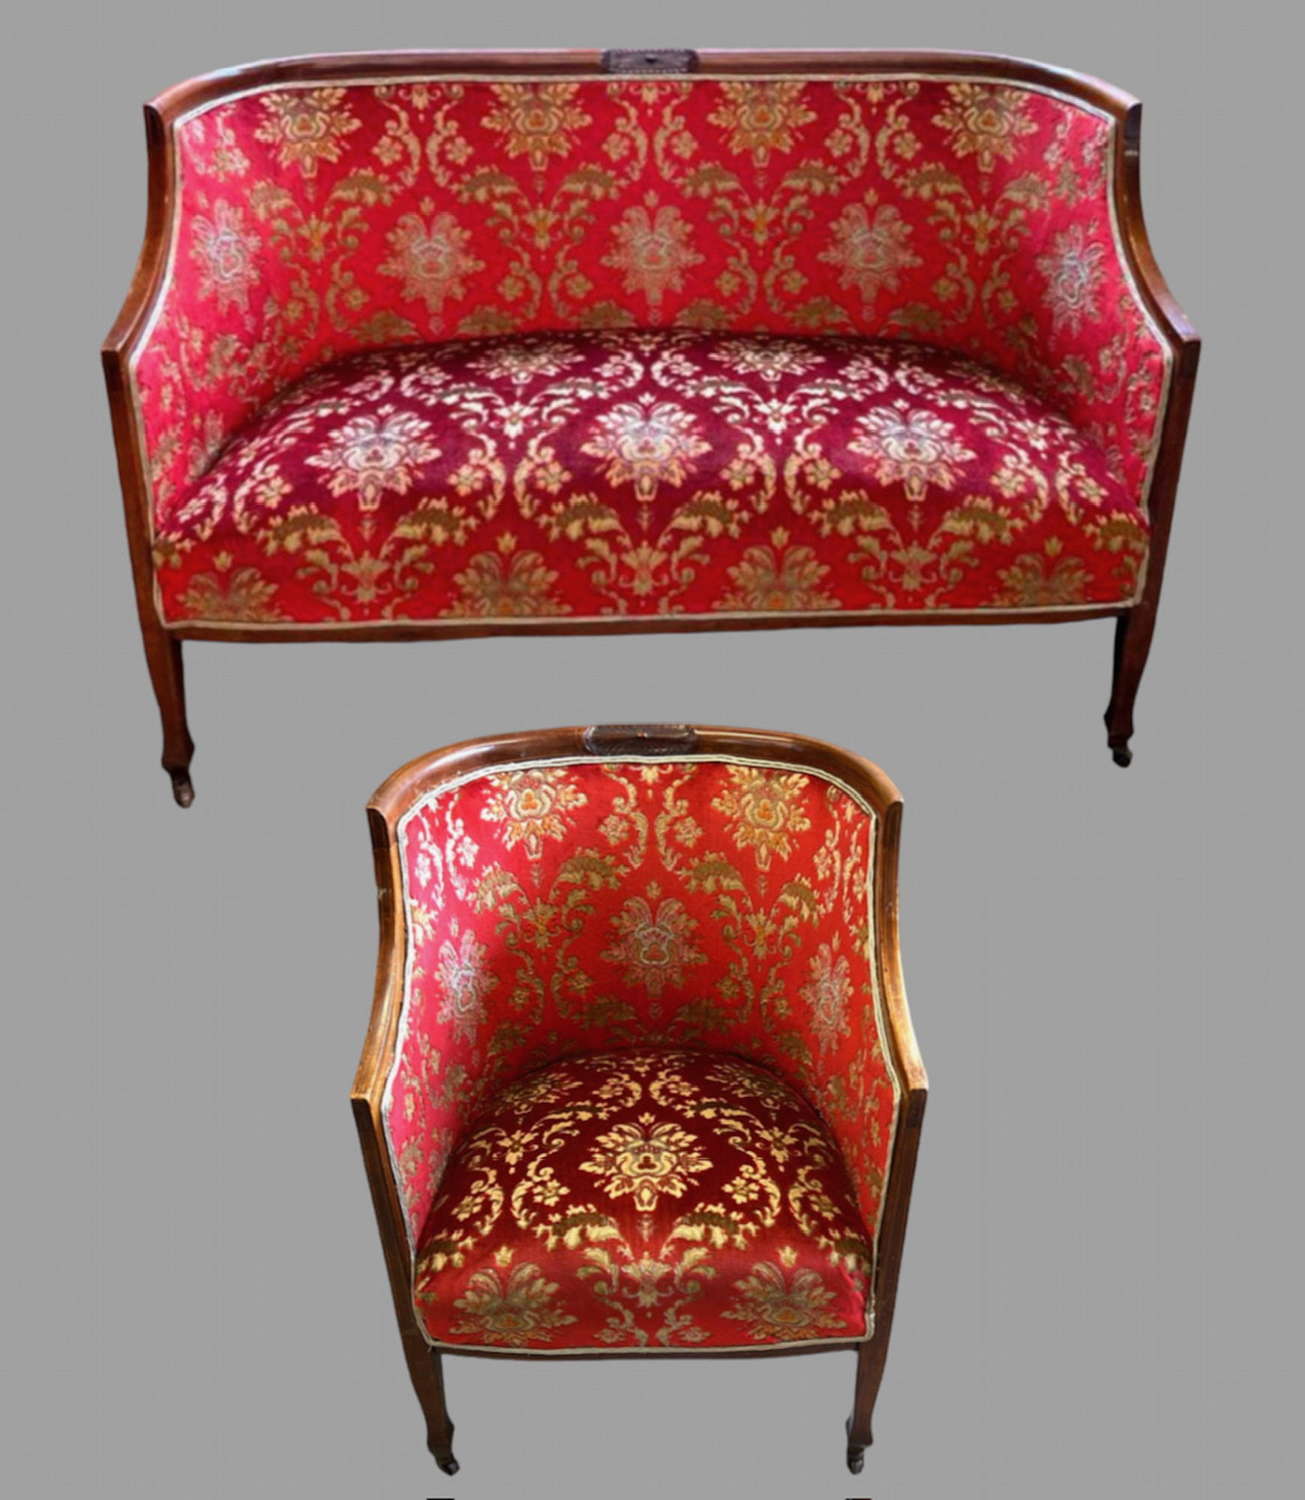 An Attractive Edwardian Settee and Chair